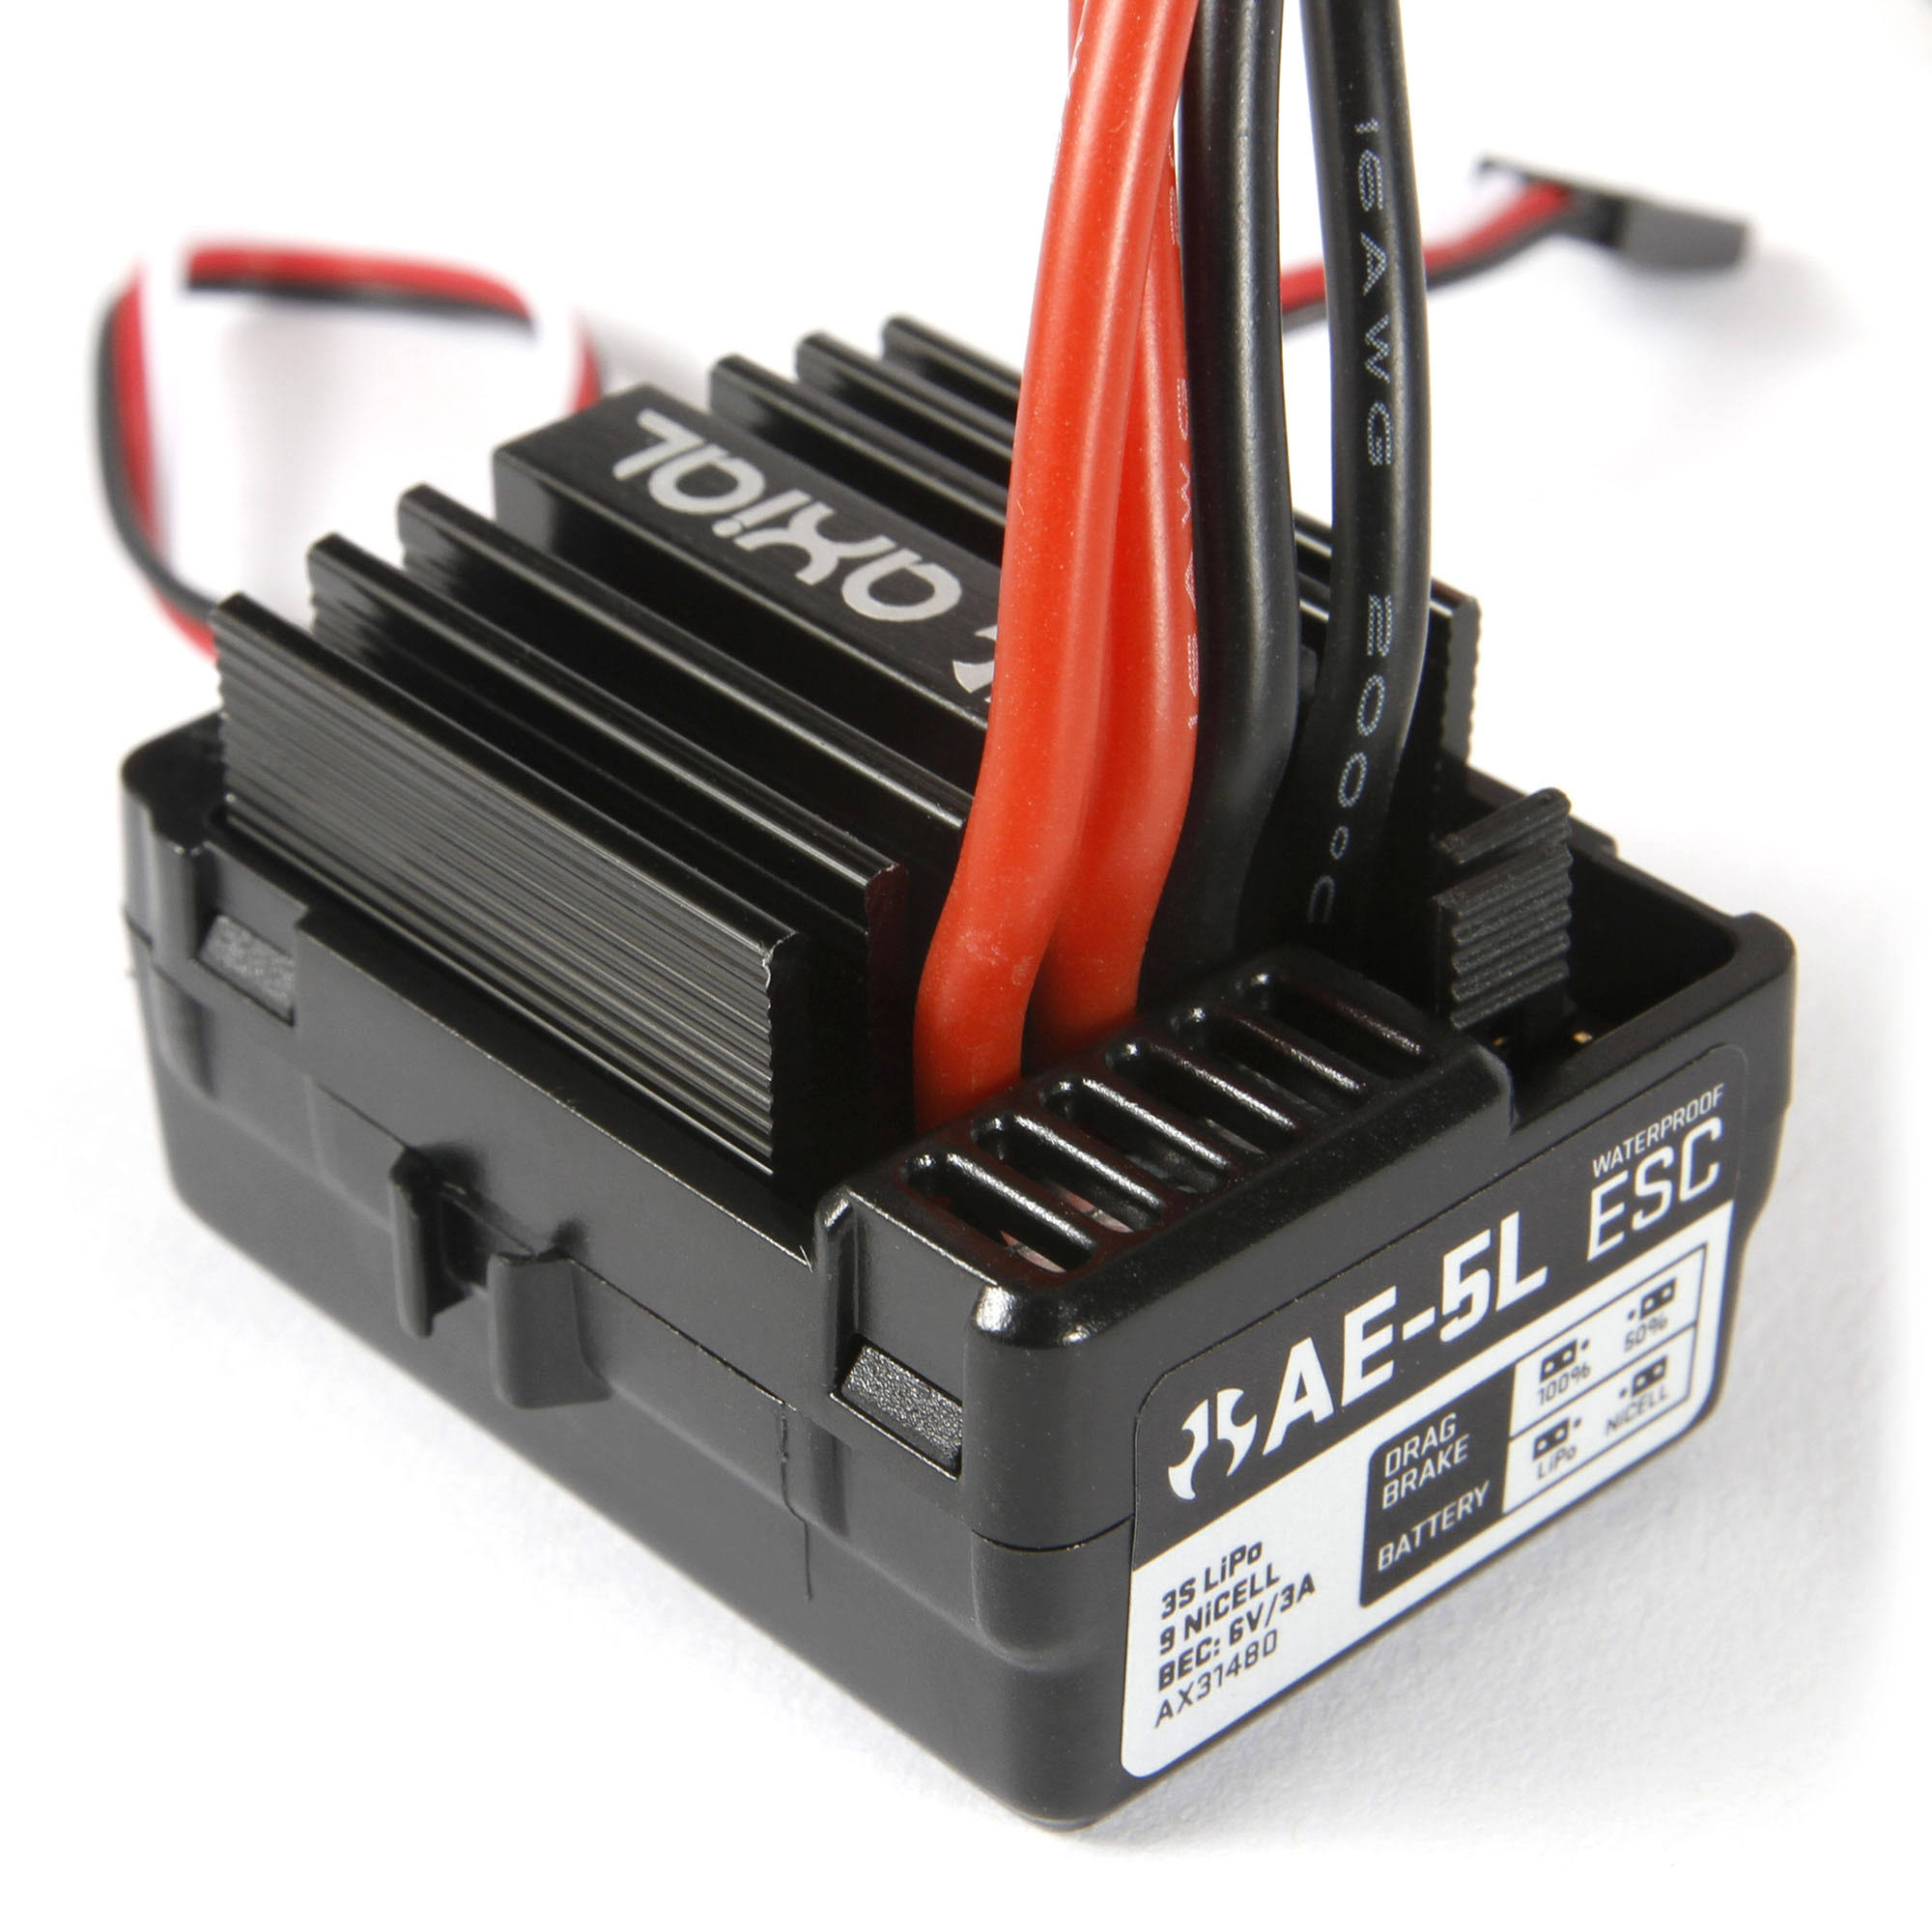 Axial AXIC1480 / AX31480 AE-5L ESC with LED connector / light